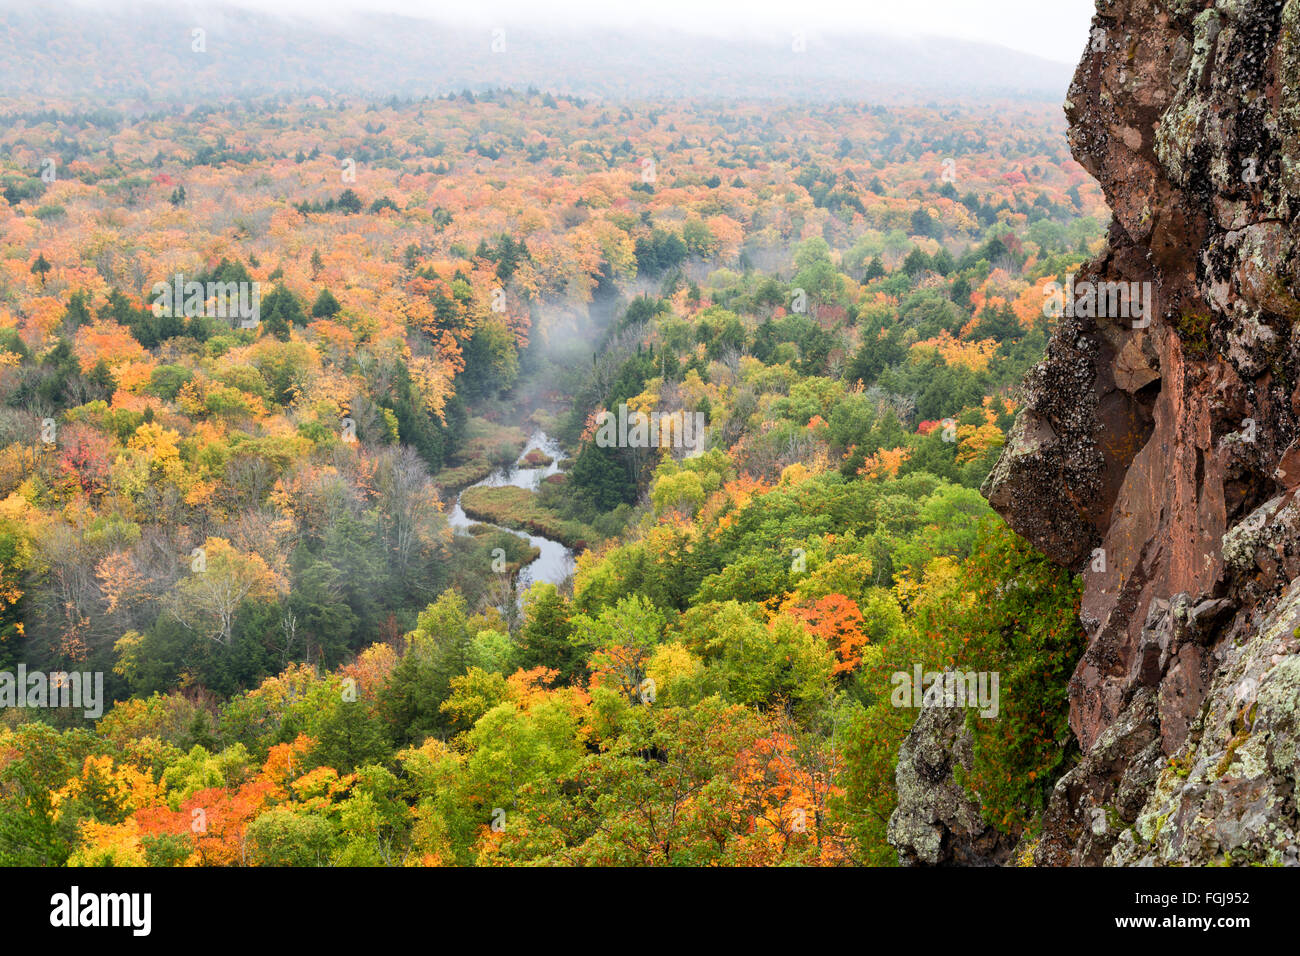 Porcupine Mountains Carp River Valley. Autumn colors pop with saturation from the mist as fog drifts above the river. Stock Photo